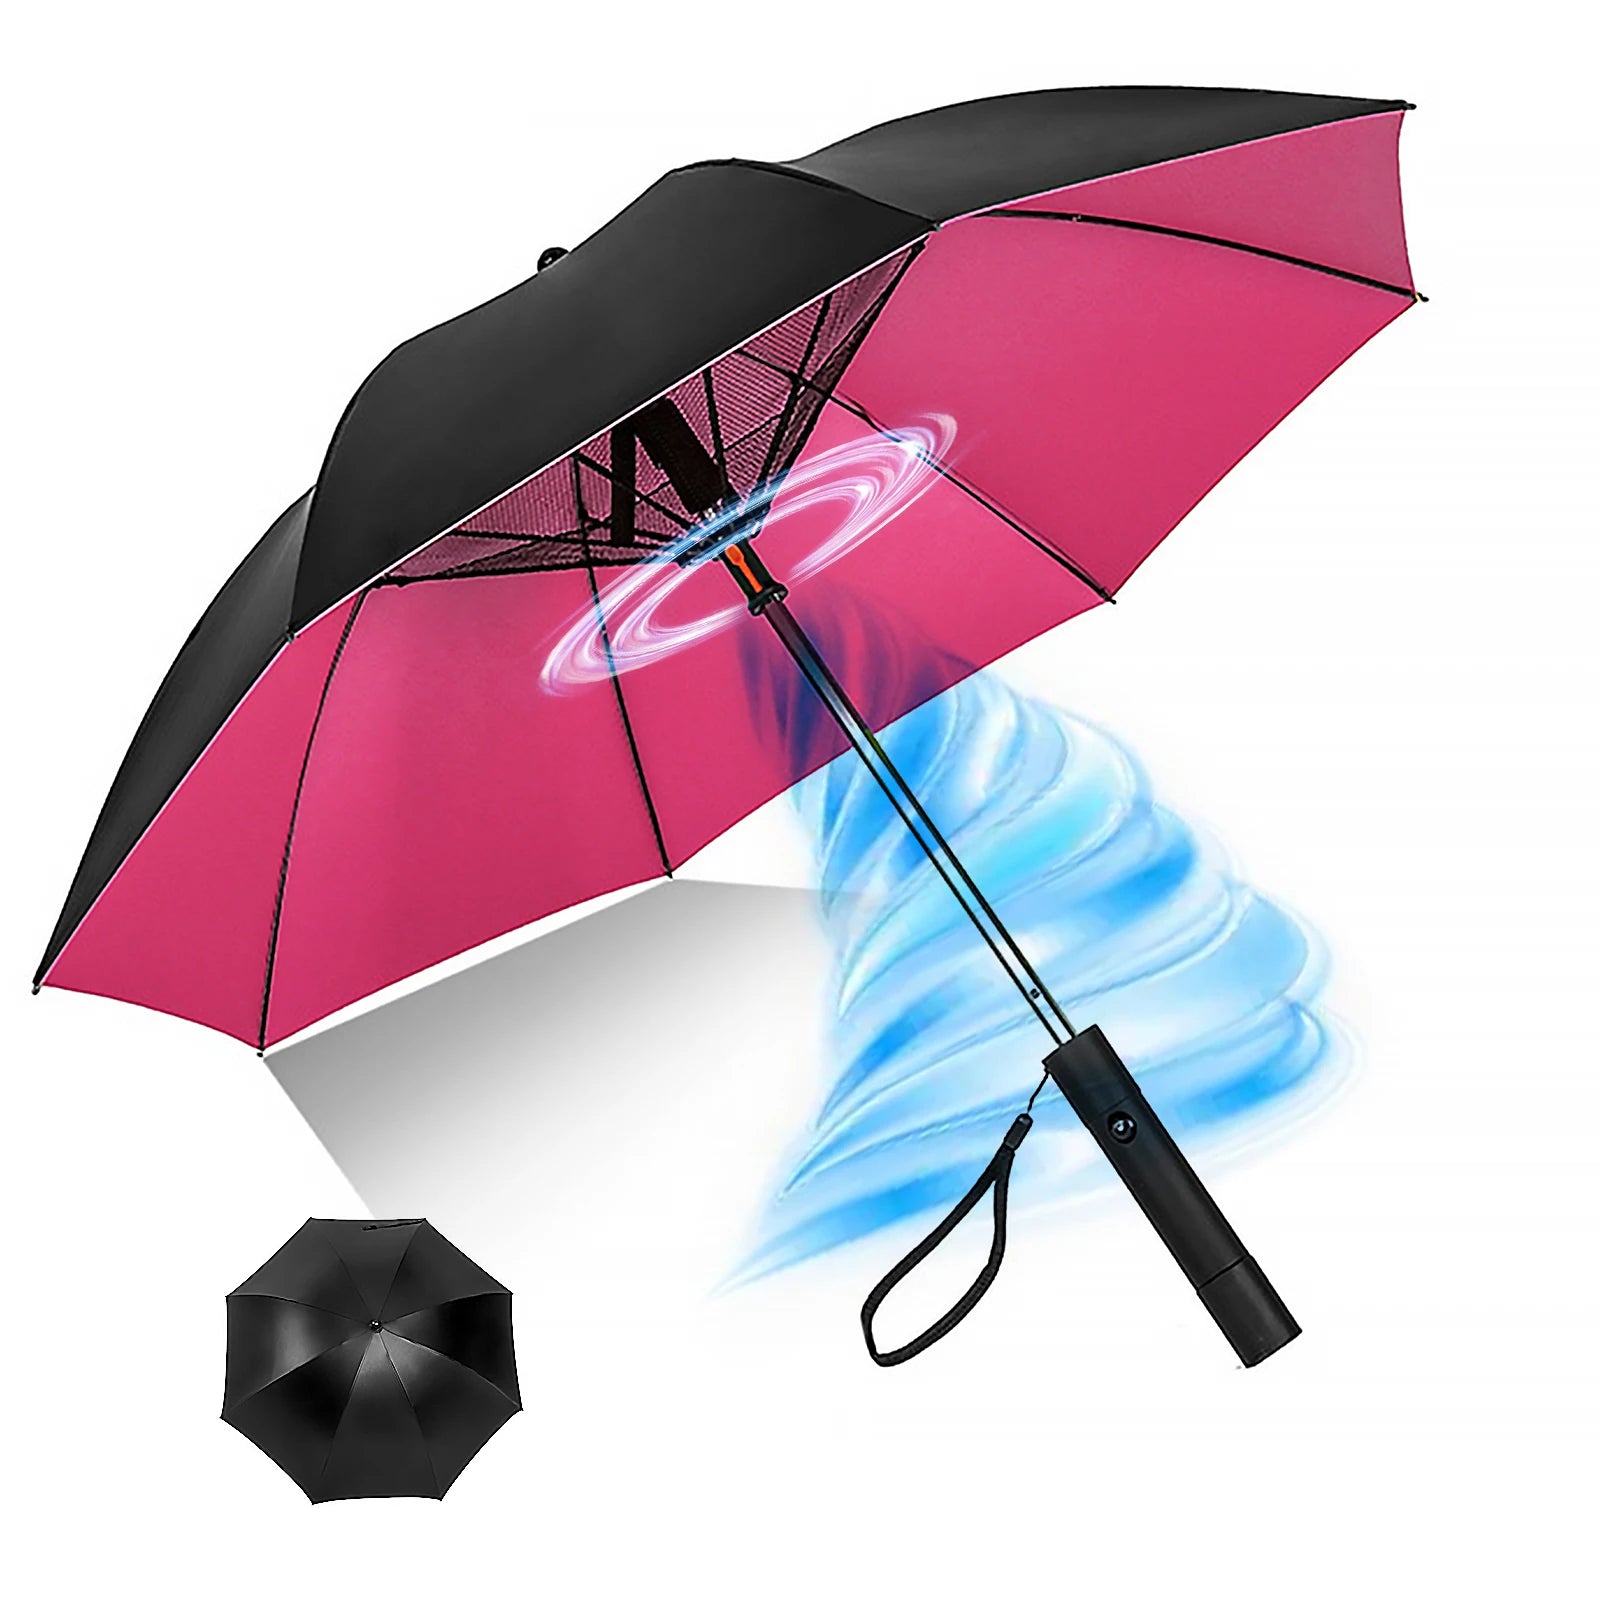 Portable Umbrella with Fan and UV Protection, Rechargeable, Strong Wind-Resistant Design